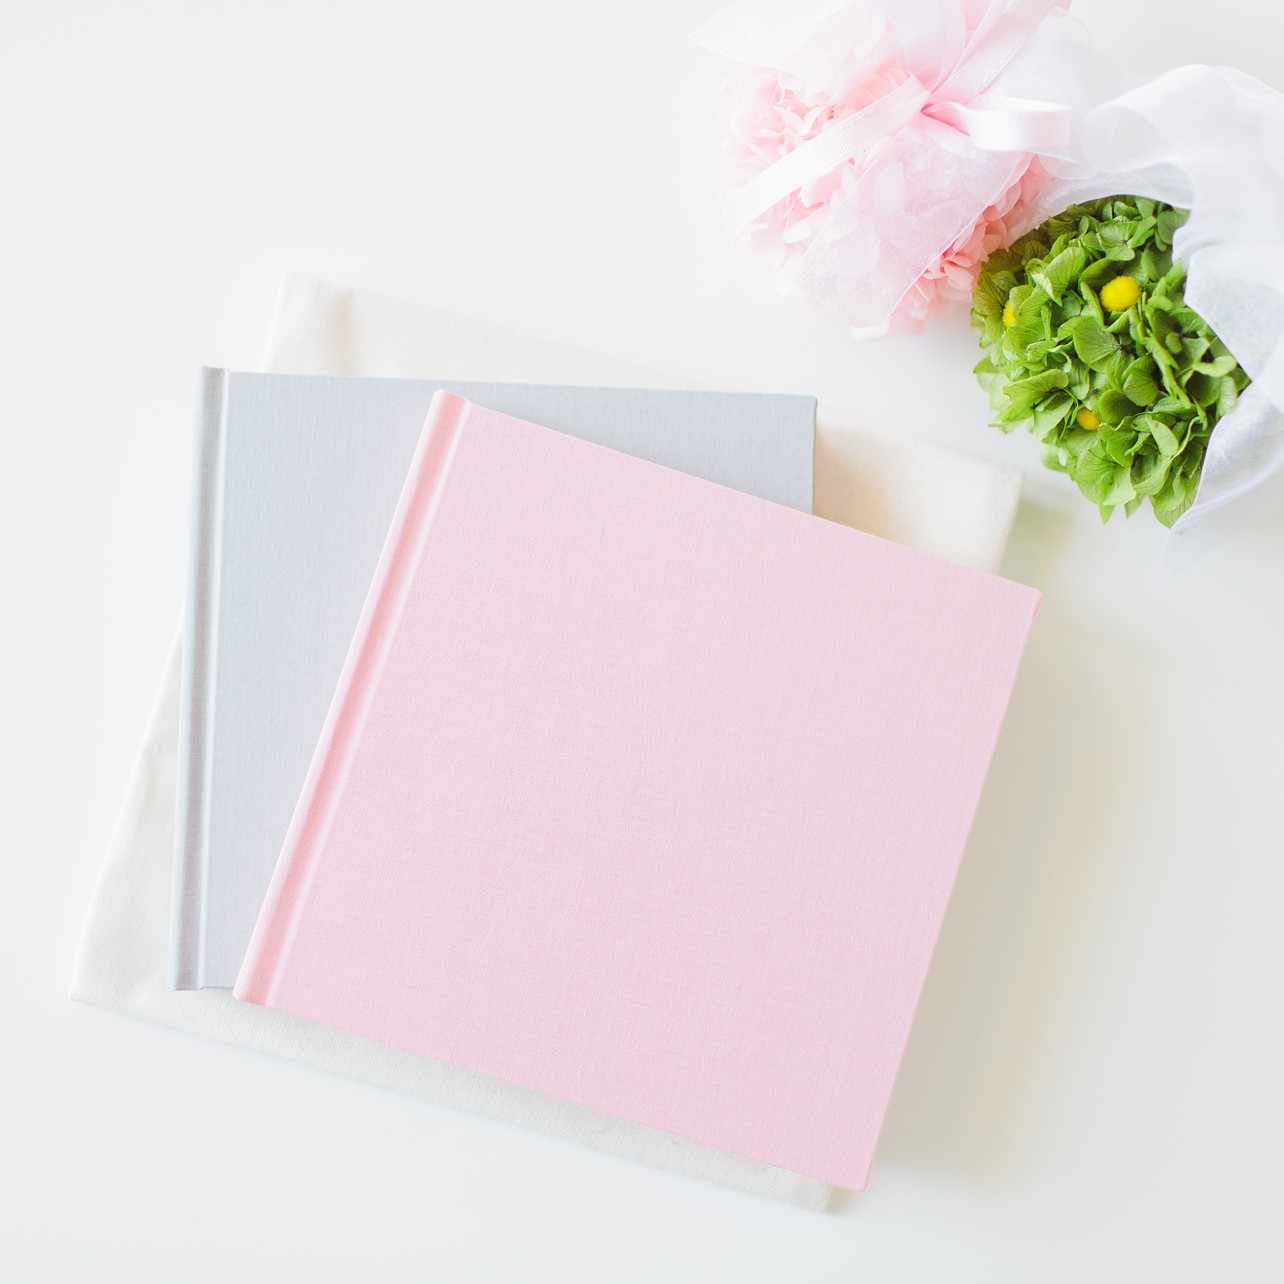 Gray and Pink Linen Photo Albums with pink and green ball preserved flower.